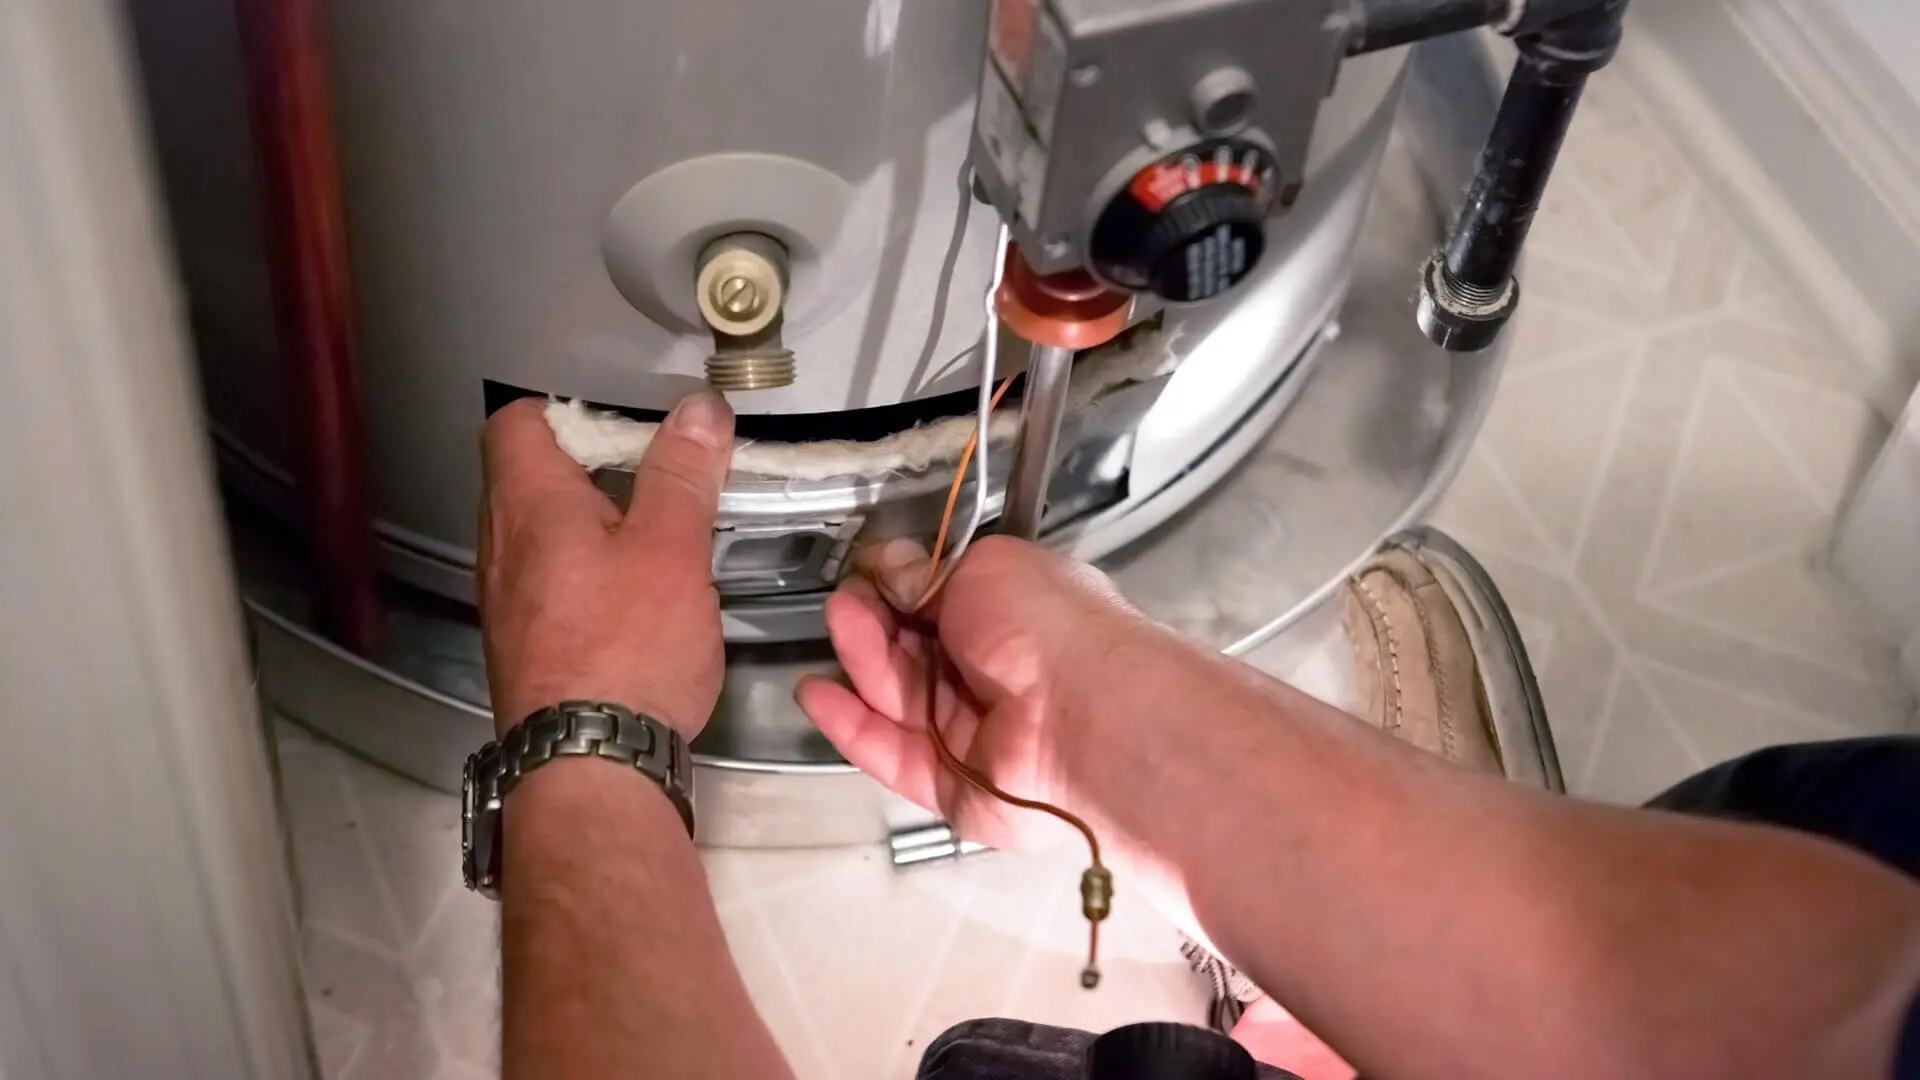 Brrr! Hot Water Woes? Emergency Water Heater Repair to the Rescue!